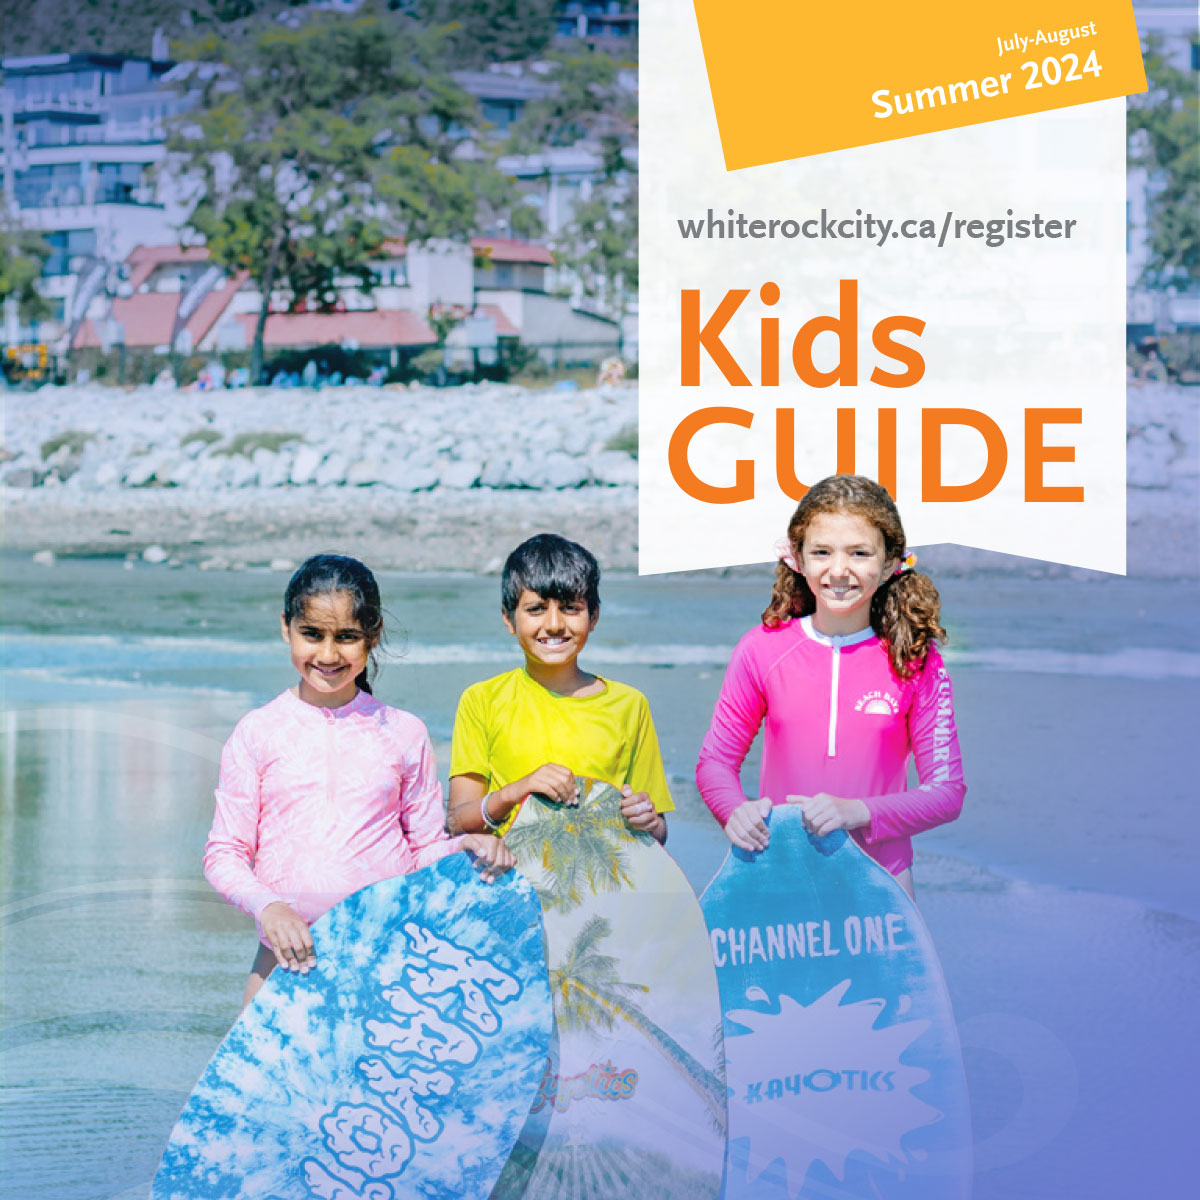 🌞Get ready for a summer of fun and exploration in White Rock! Our Kids Summer Camp Guide is now online at tinyurl.com/yrhwpx25, packed with great summer camp options. Camp registration opens Friday, April 19 at 8:30 a.m. #WhiteRockBC